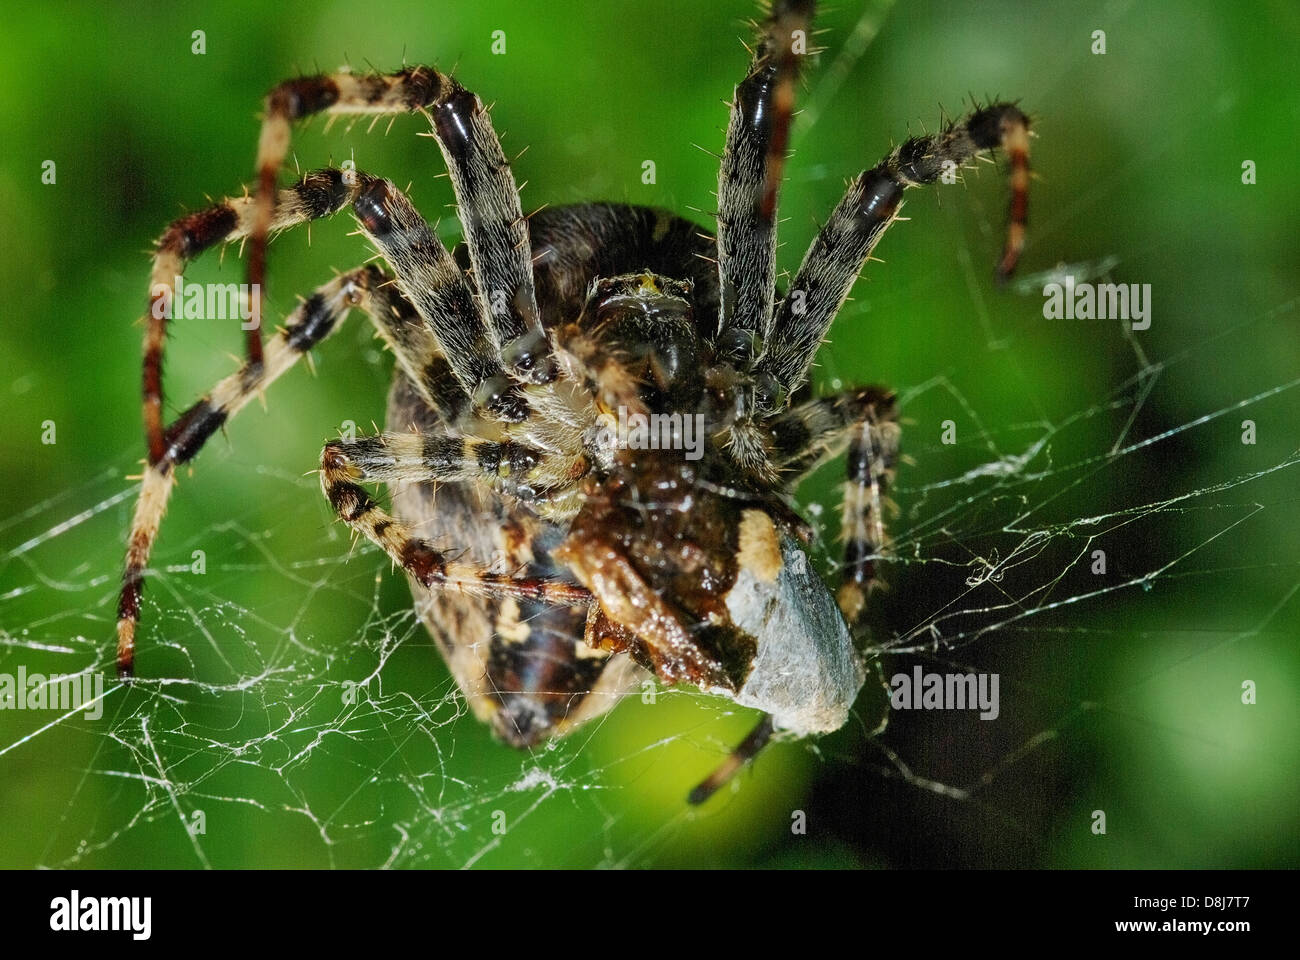 When the Spider eat Prey Stock Photo